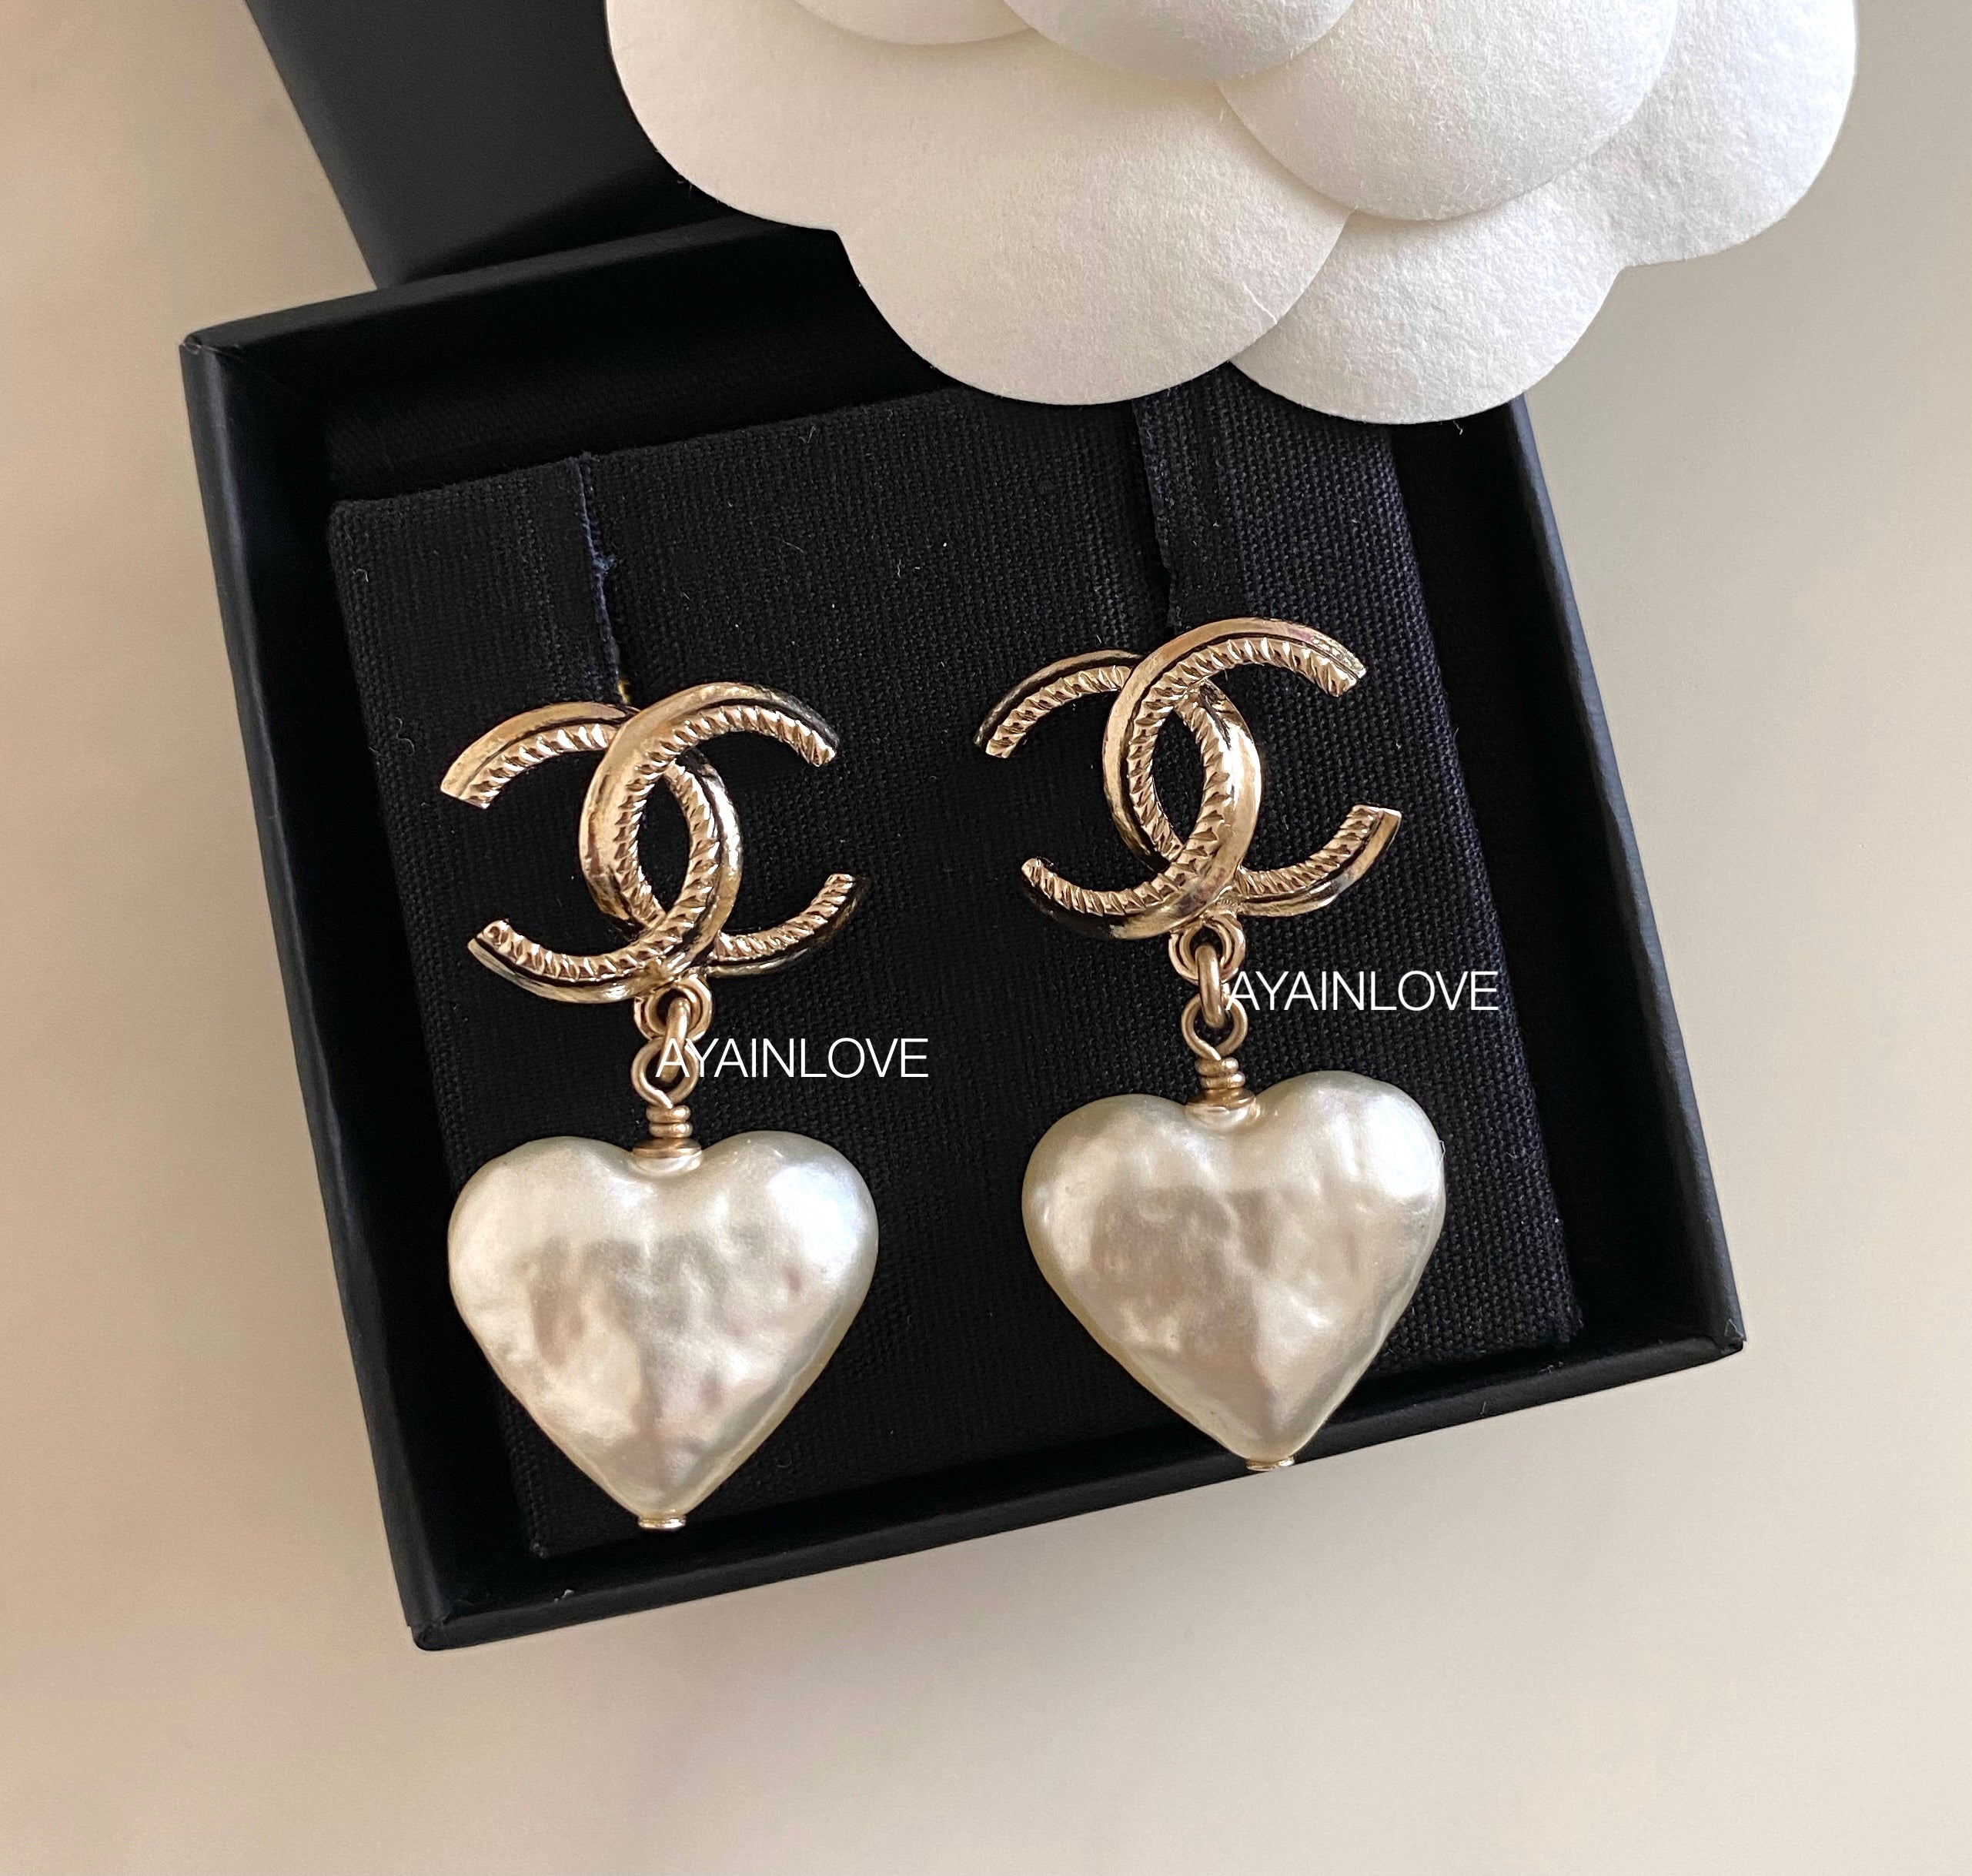 anybody know the price of this chanel pearl drop earrings?